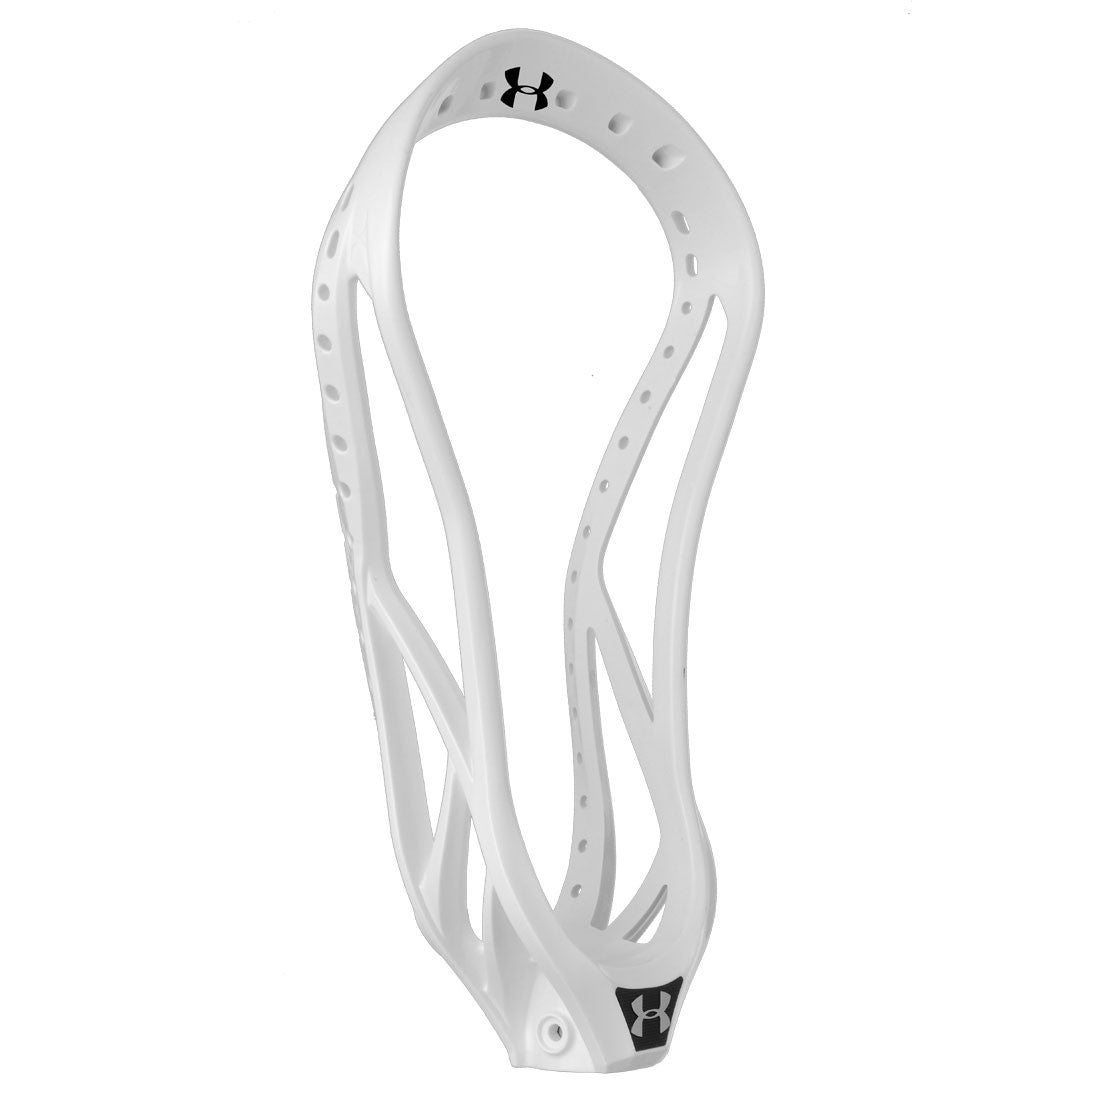 Under Armour Command X Face Off 2 Pack-Universal Lacrosse